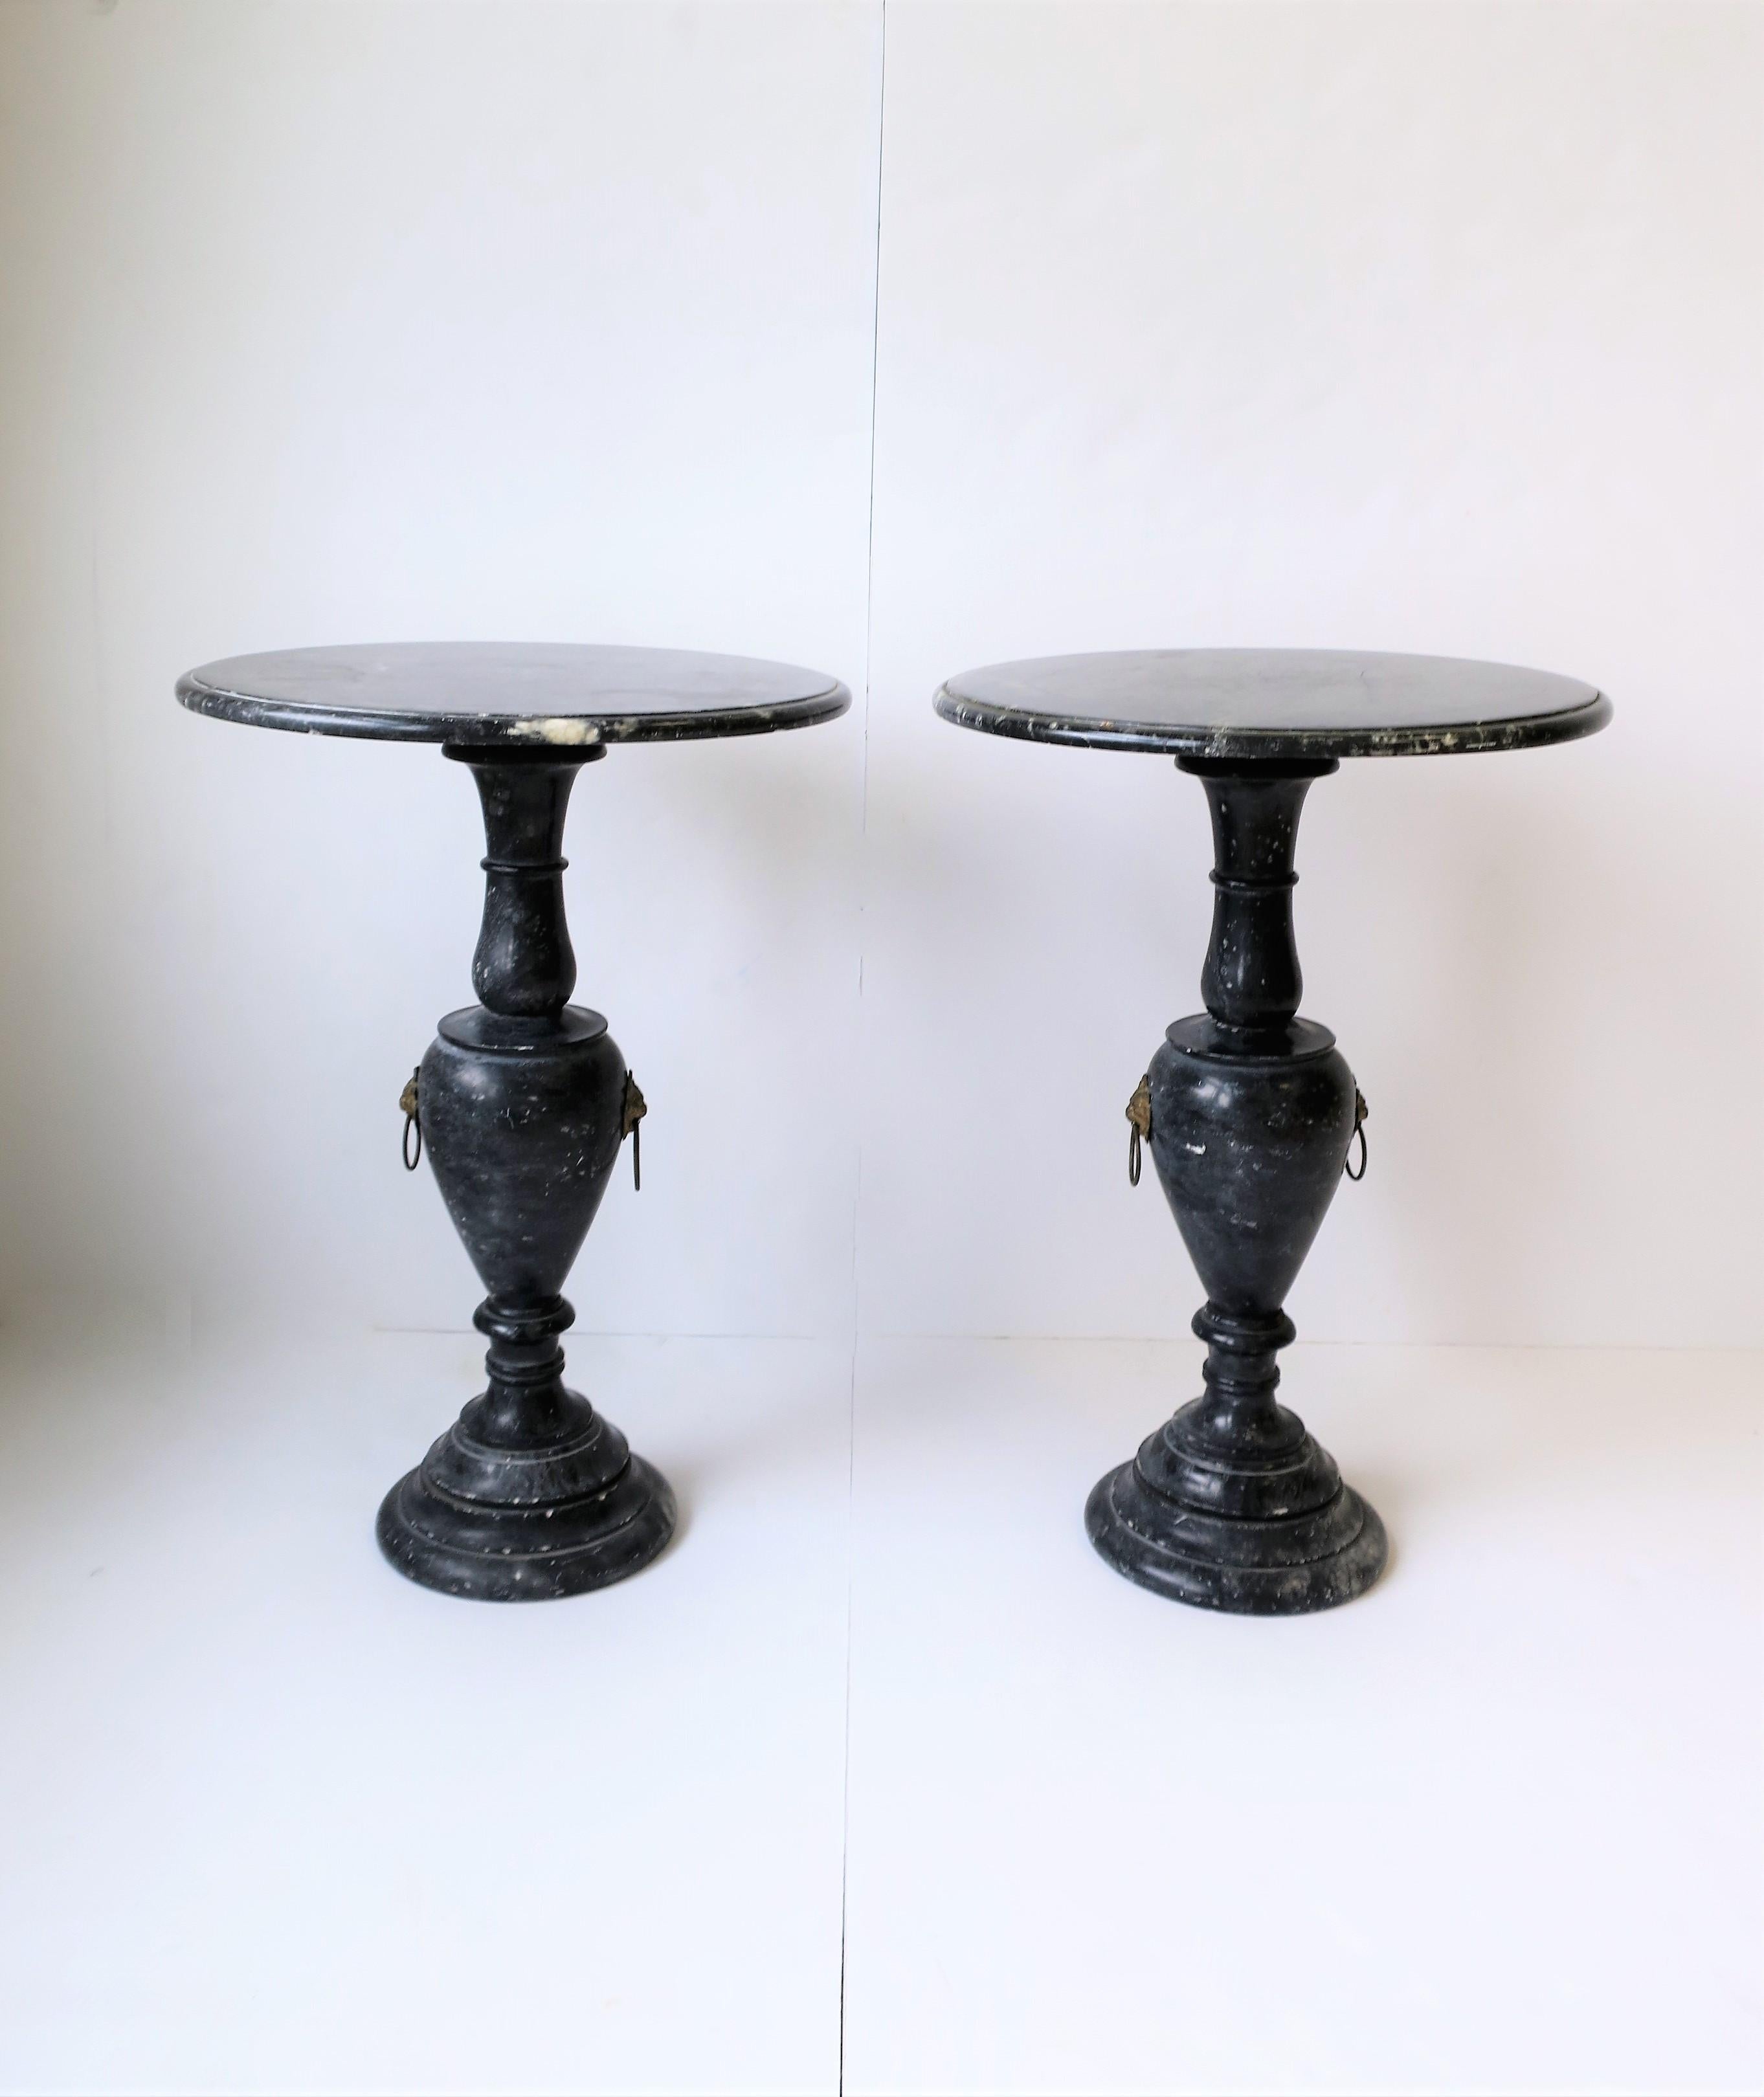 Regency Italian Black and White Marble Round Side Table